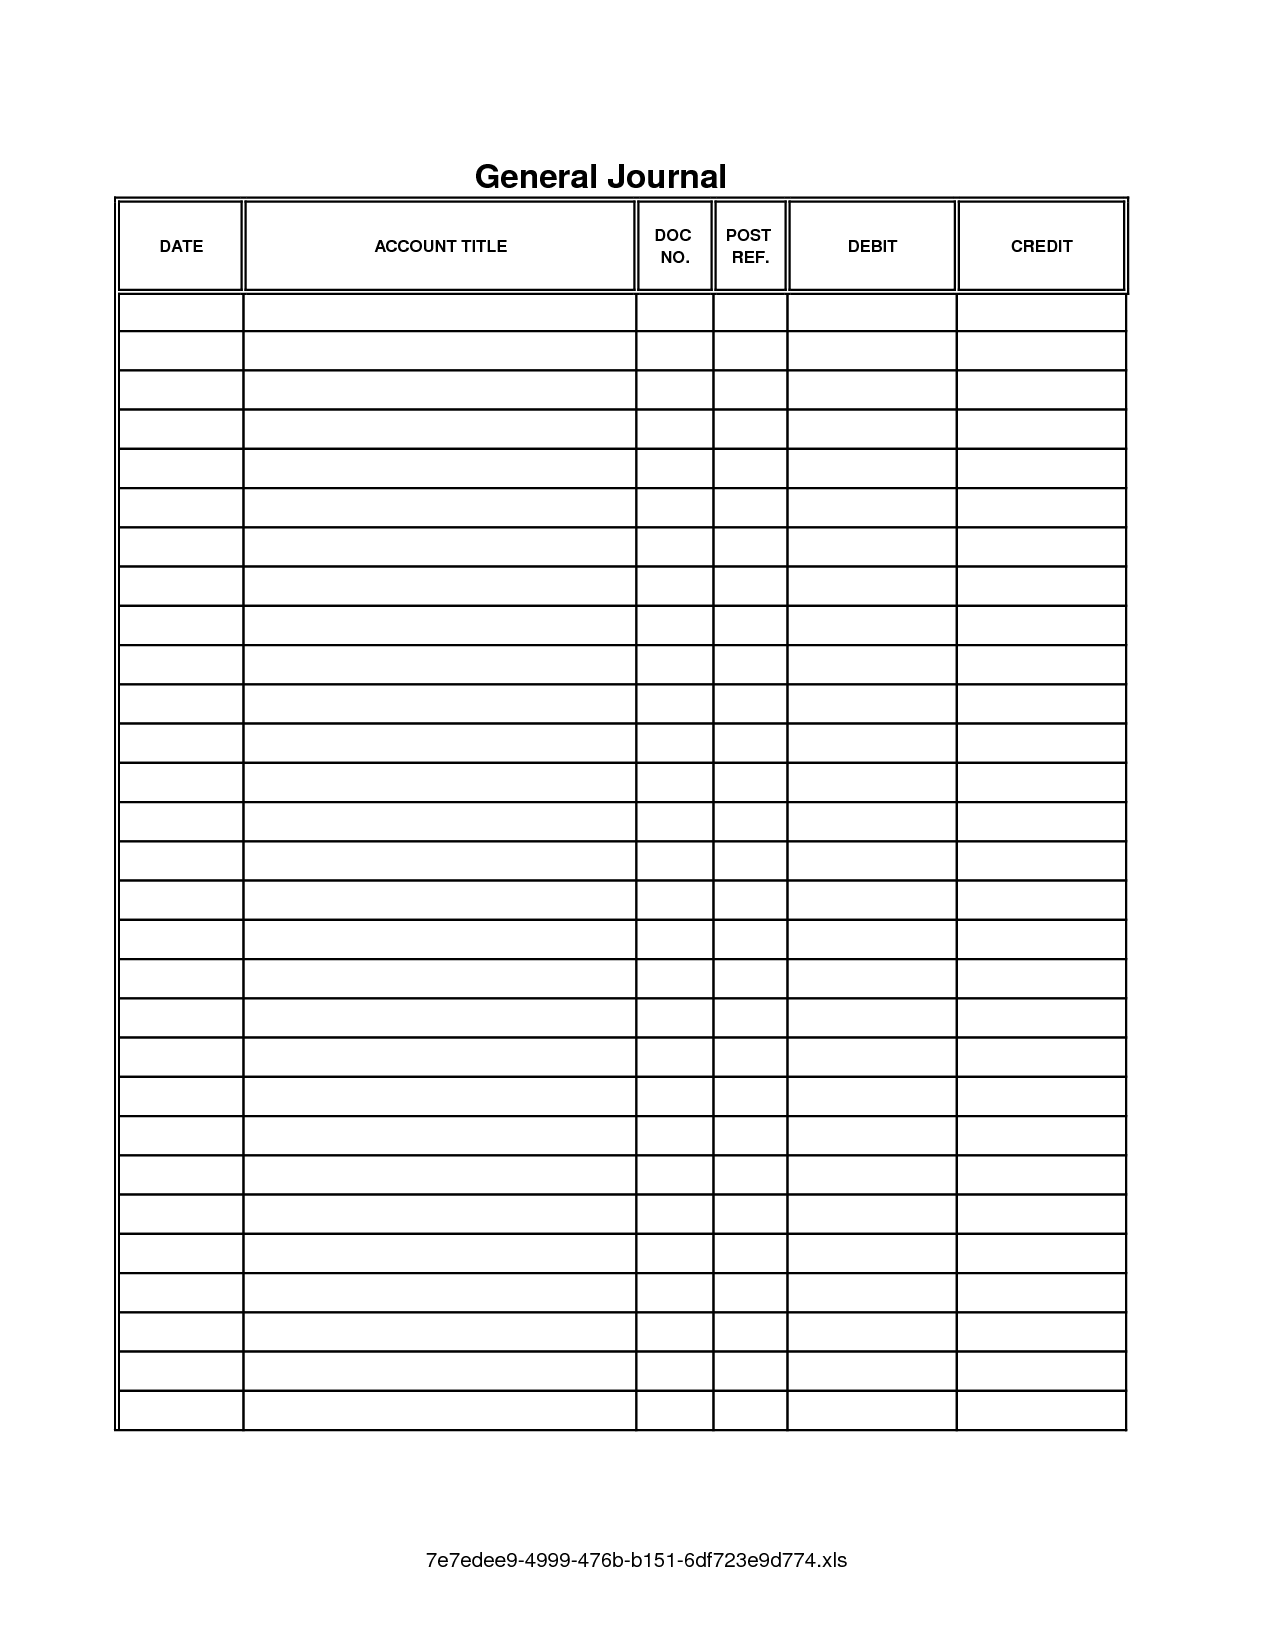 9-best-images-of-printable-accounting-journal-templates-accounting-general-journal-template